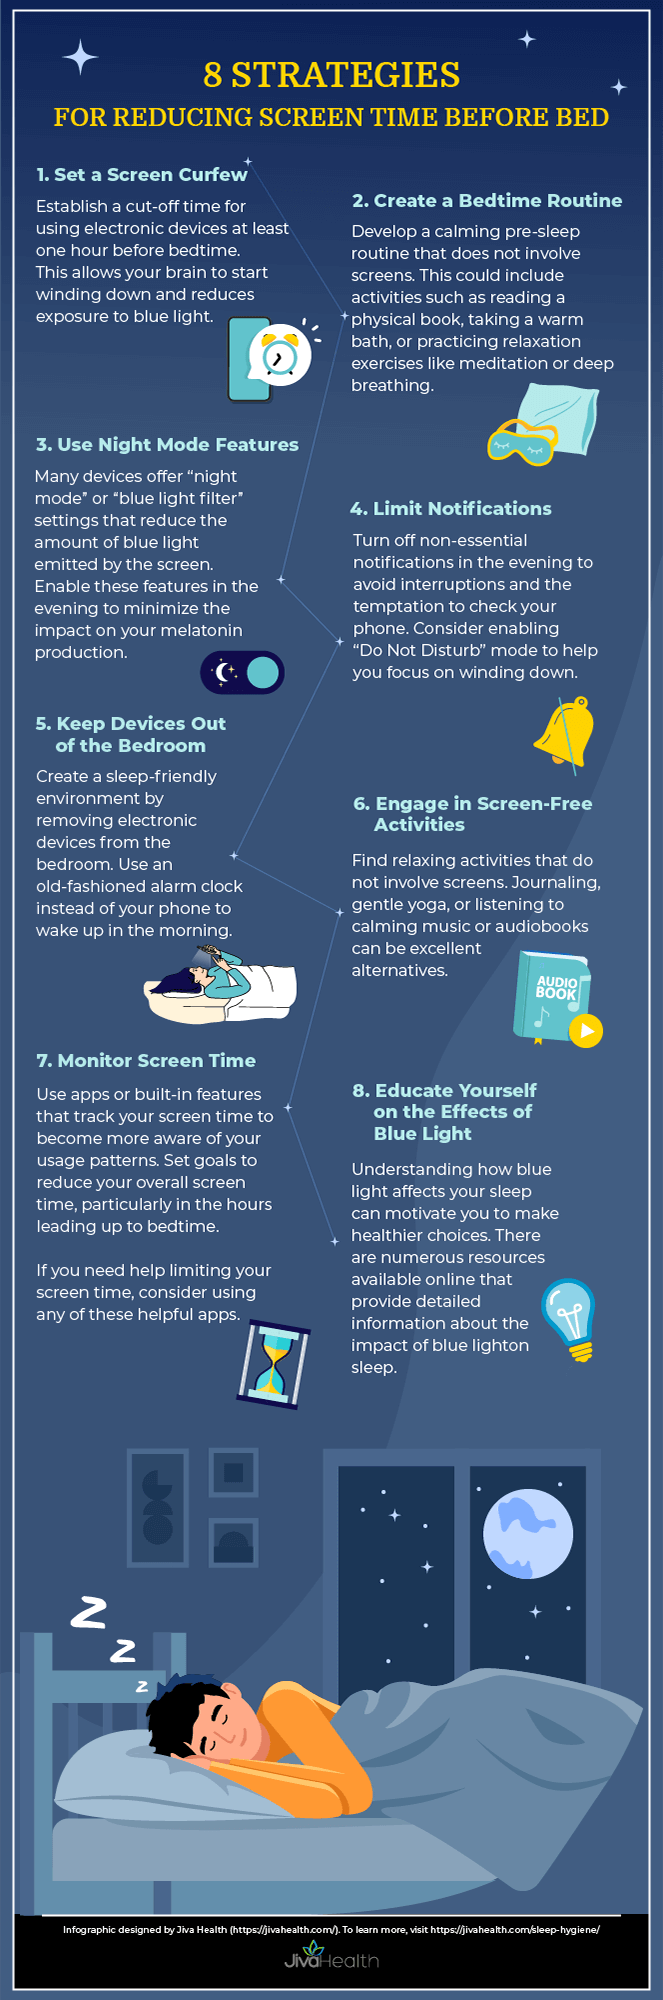 Strategies for Reducing Screen Time Before Bed (Infographic)